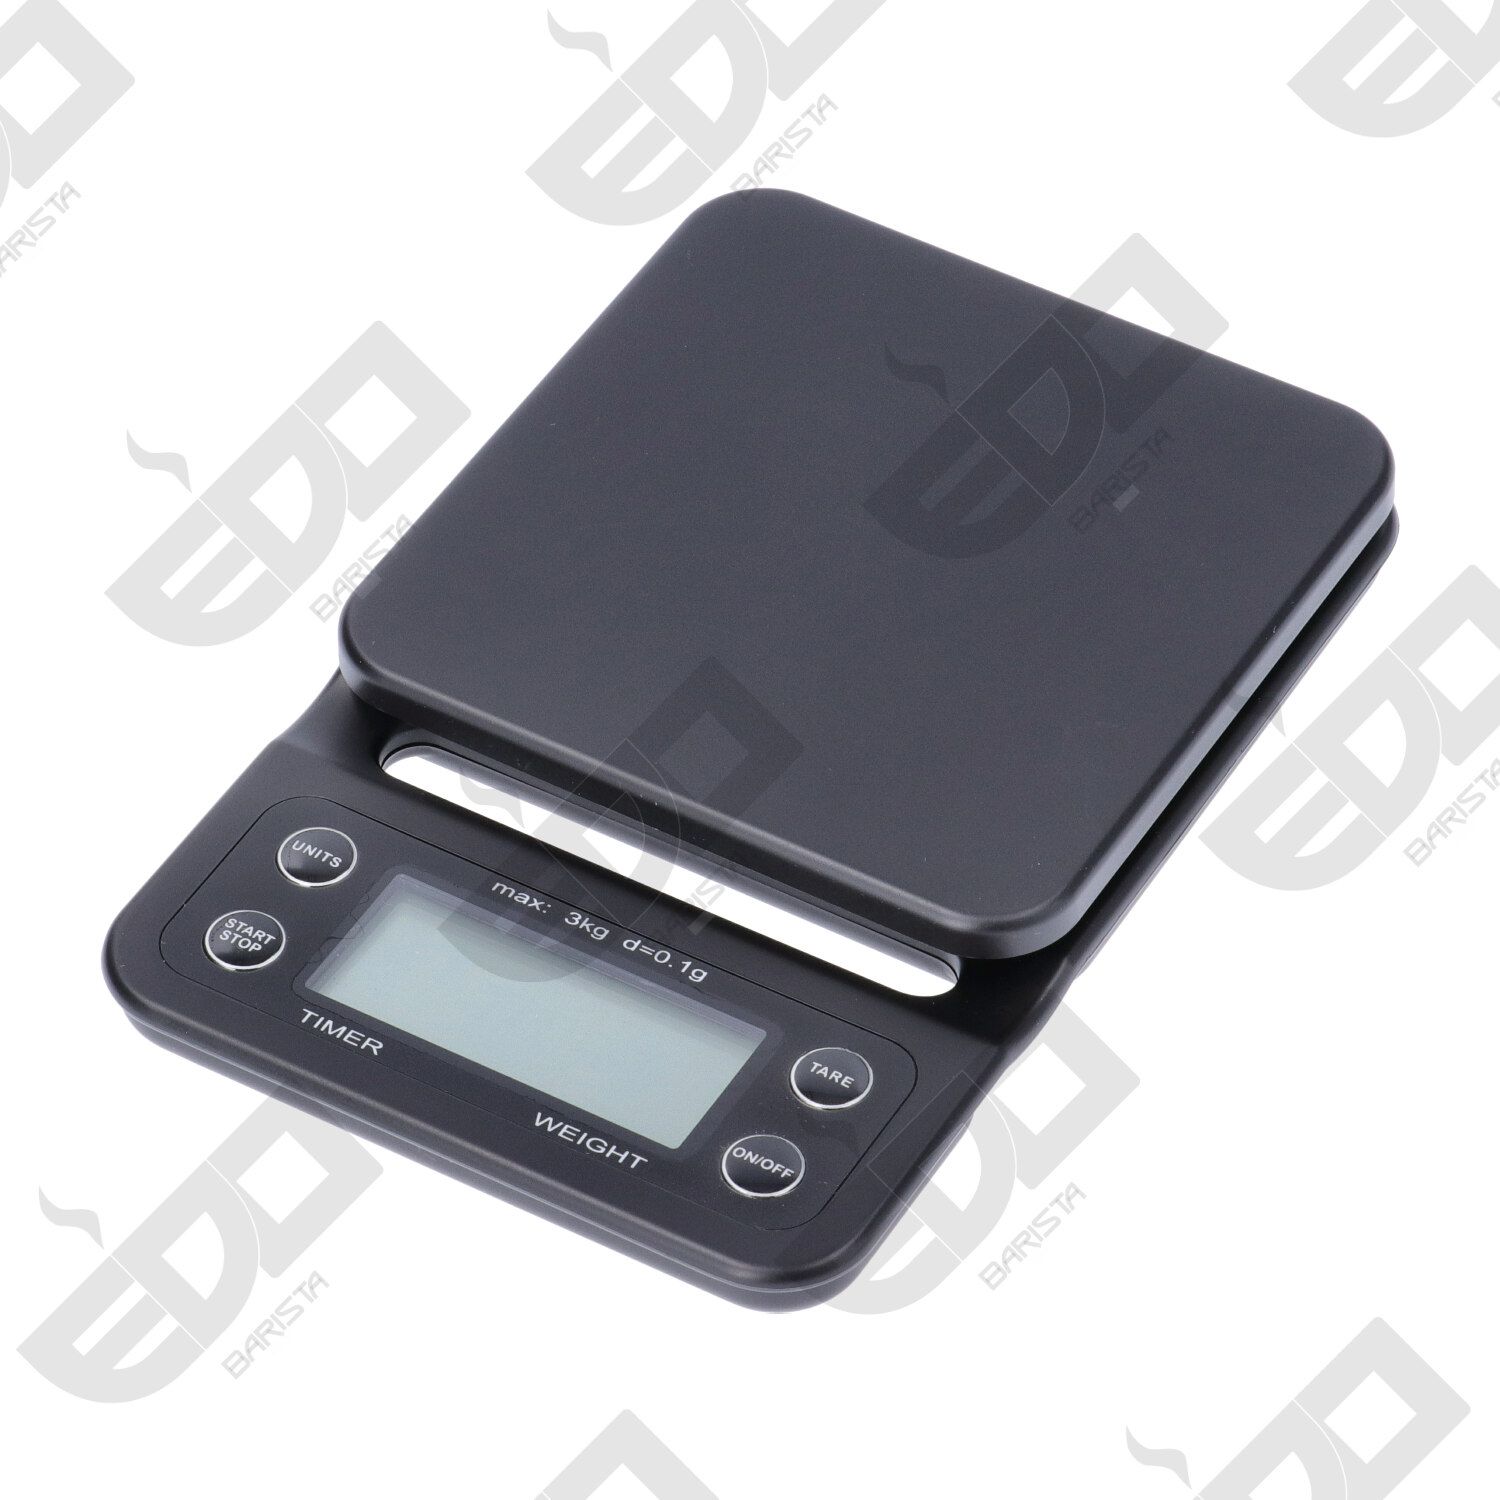 American Weigh Scales Barista Series Kitchen Coffee Weight Scale